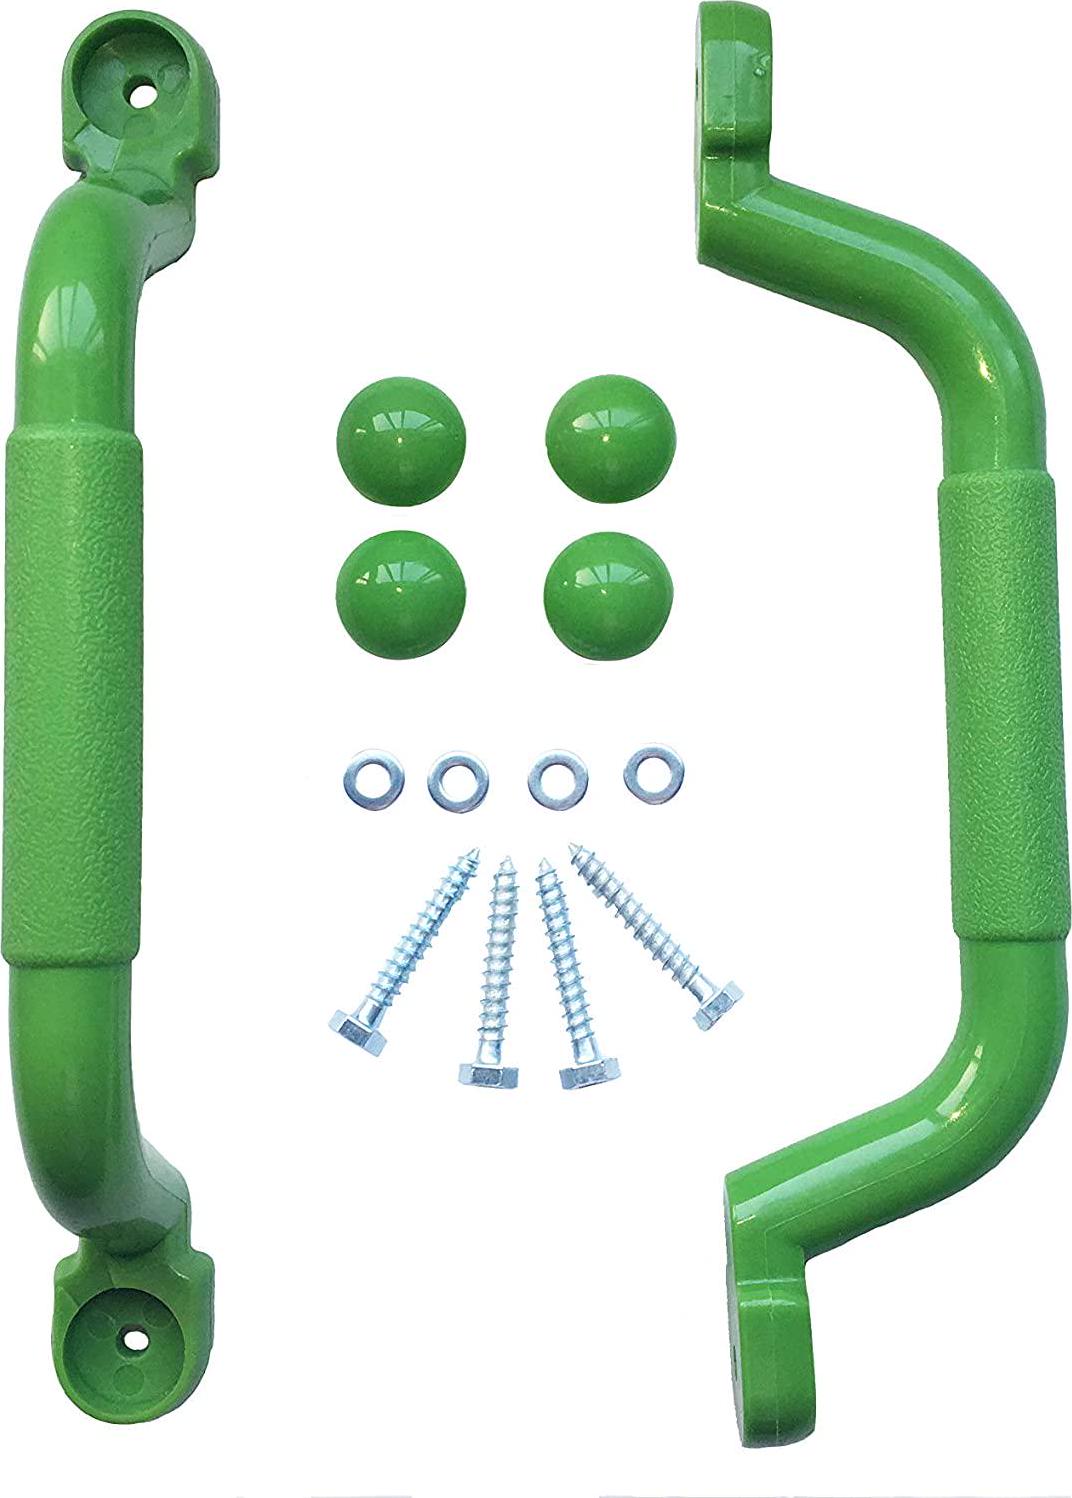 KINSPORY, KINSPORY 10.6'' Kids Safety Handle Grips with Dermatoglyph for Outdoor Climbing Frame (Green)